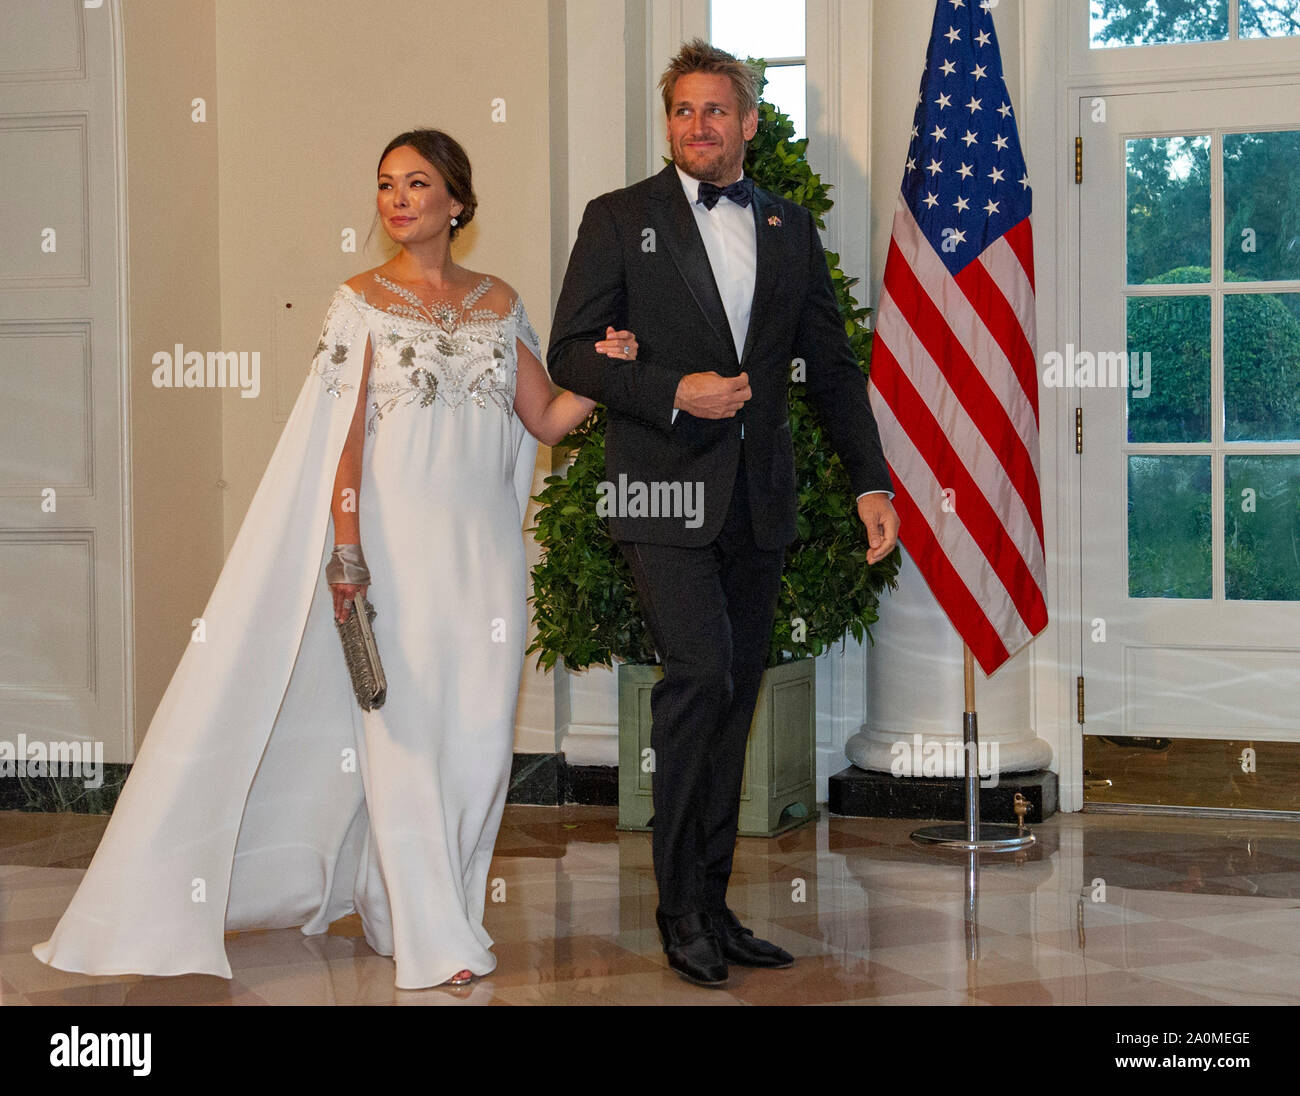 Washington, United States Of America. 20th Sep, 2019. Australian celebrity chef, author and television personality Curtis Stone and Lindsay Stone arrive for the State Dinner hosted by United States President Donald J. Trump and First lady Melania Trump in honor of Prime Minister Scott Morrison of Australia and his wife, Jenny Morrison, at the White House in Washington, DC on Friday, September 20, 2019.Credit: Ron Sachs/Pool via CNP | usage worldwide Credit: dpa/Alamy Live News Stock Photo